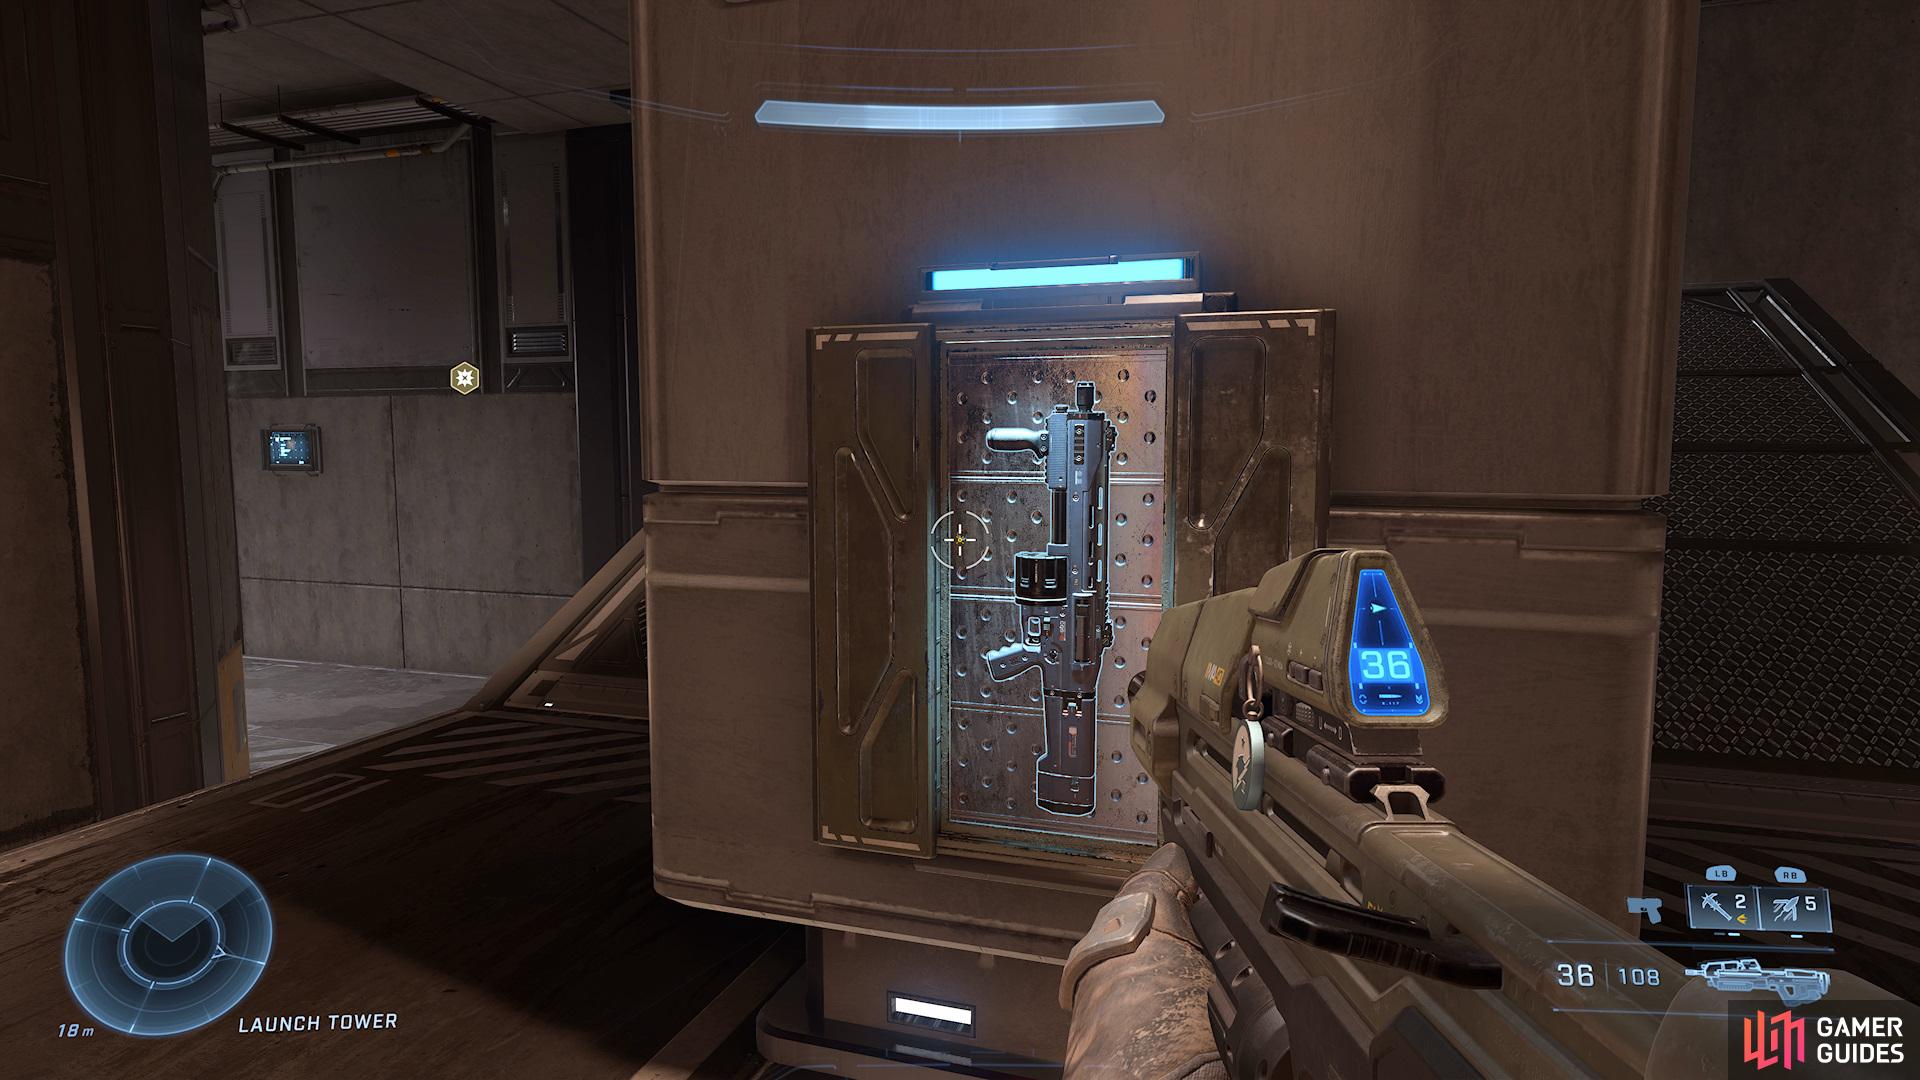 The Shotgun can be found just before the ramp at the Launch Tower. 